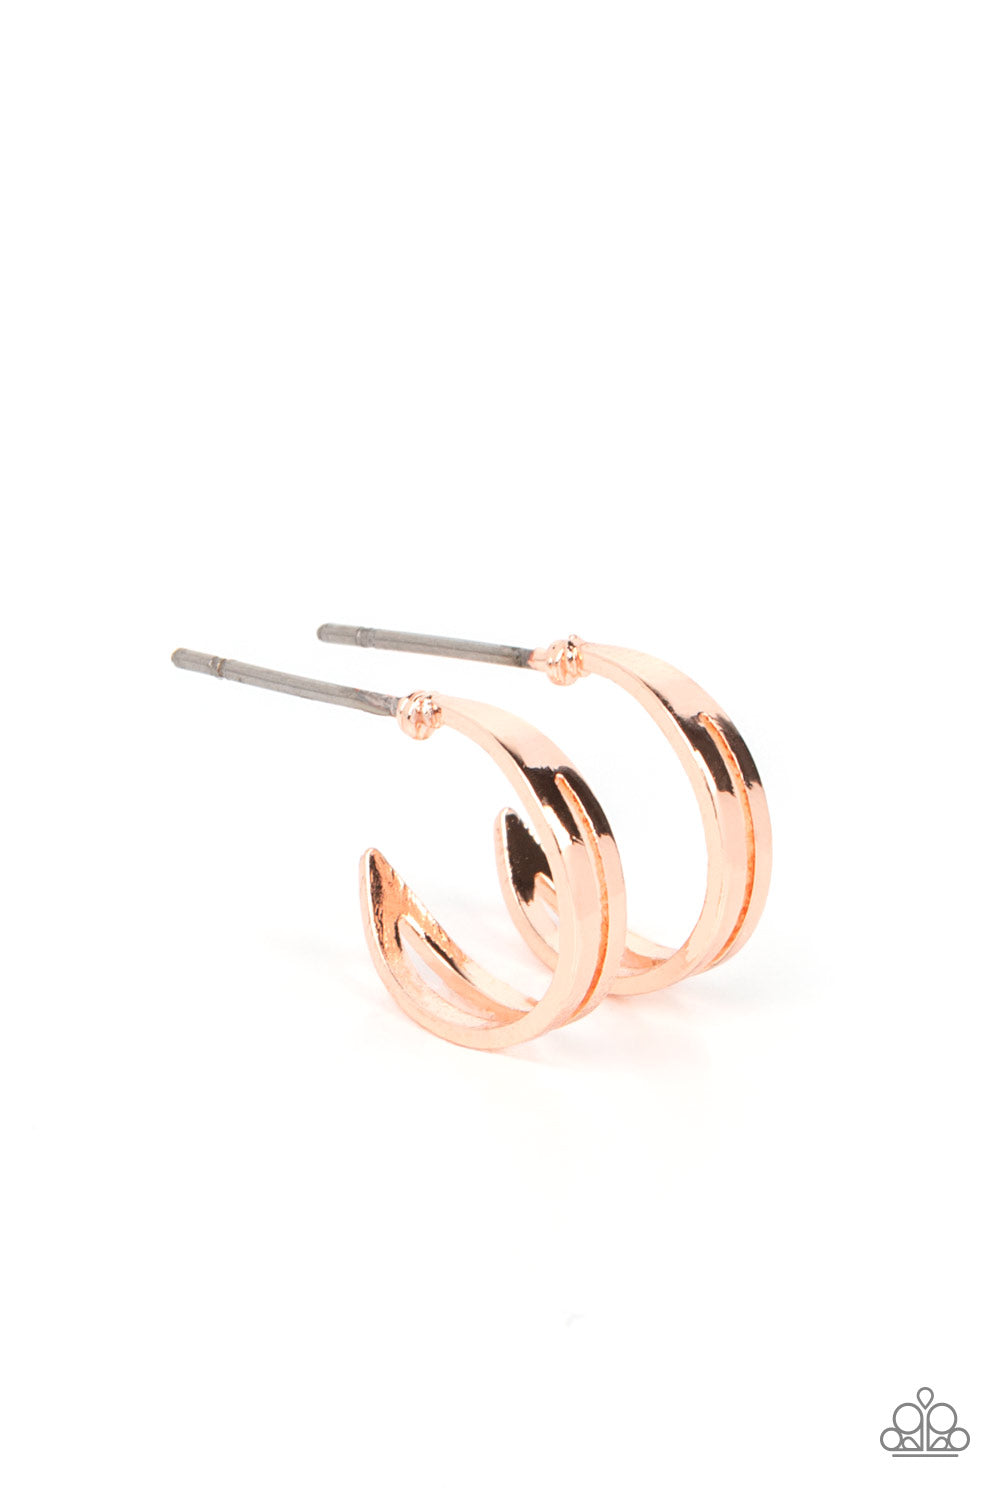 Paparazzi - SMALLEST of Them All - Rose Gold Earrings - Alies Bling Bar